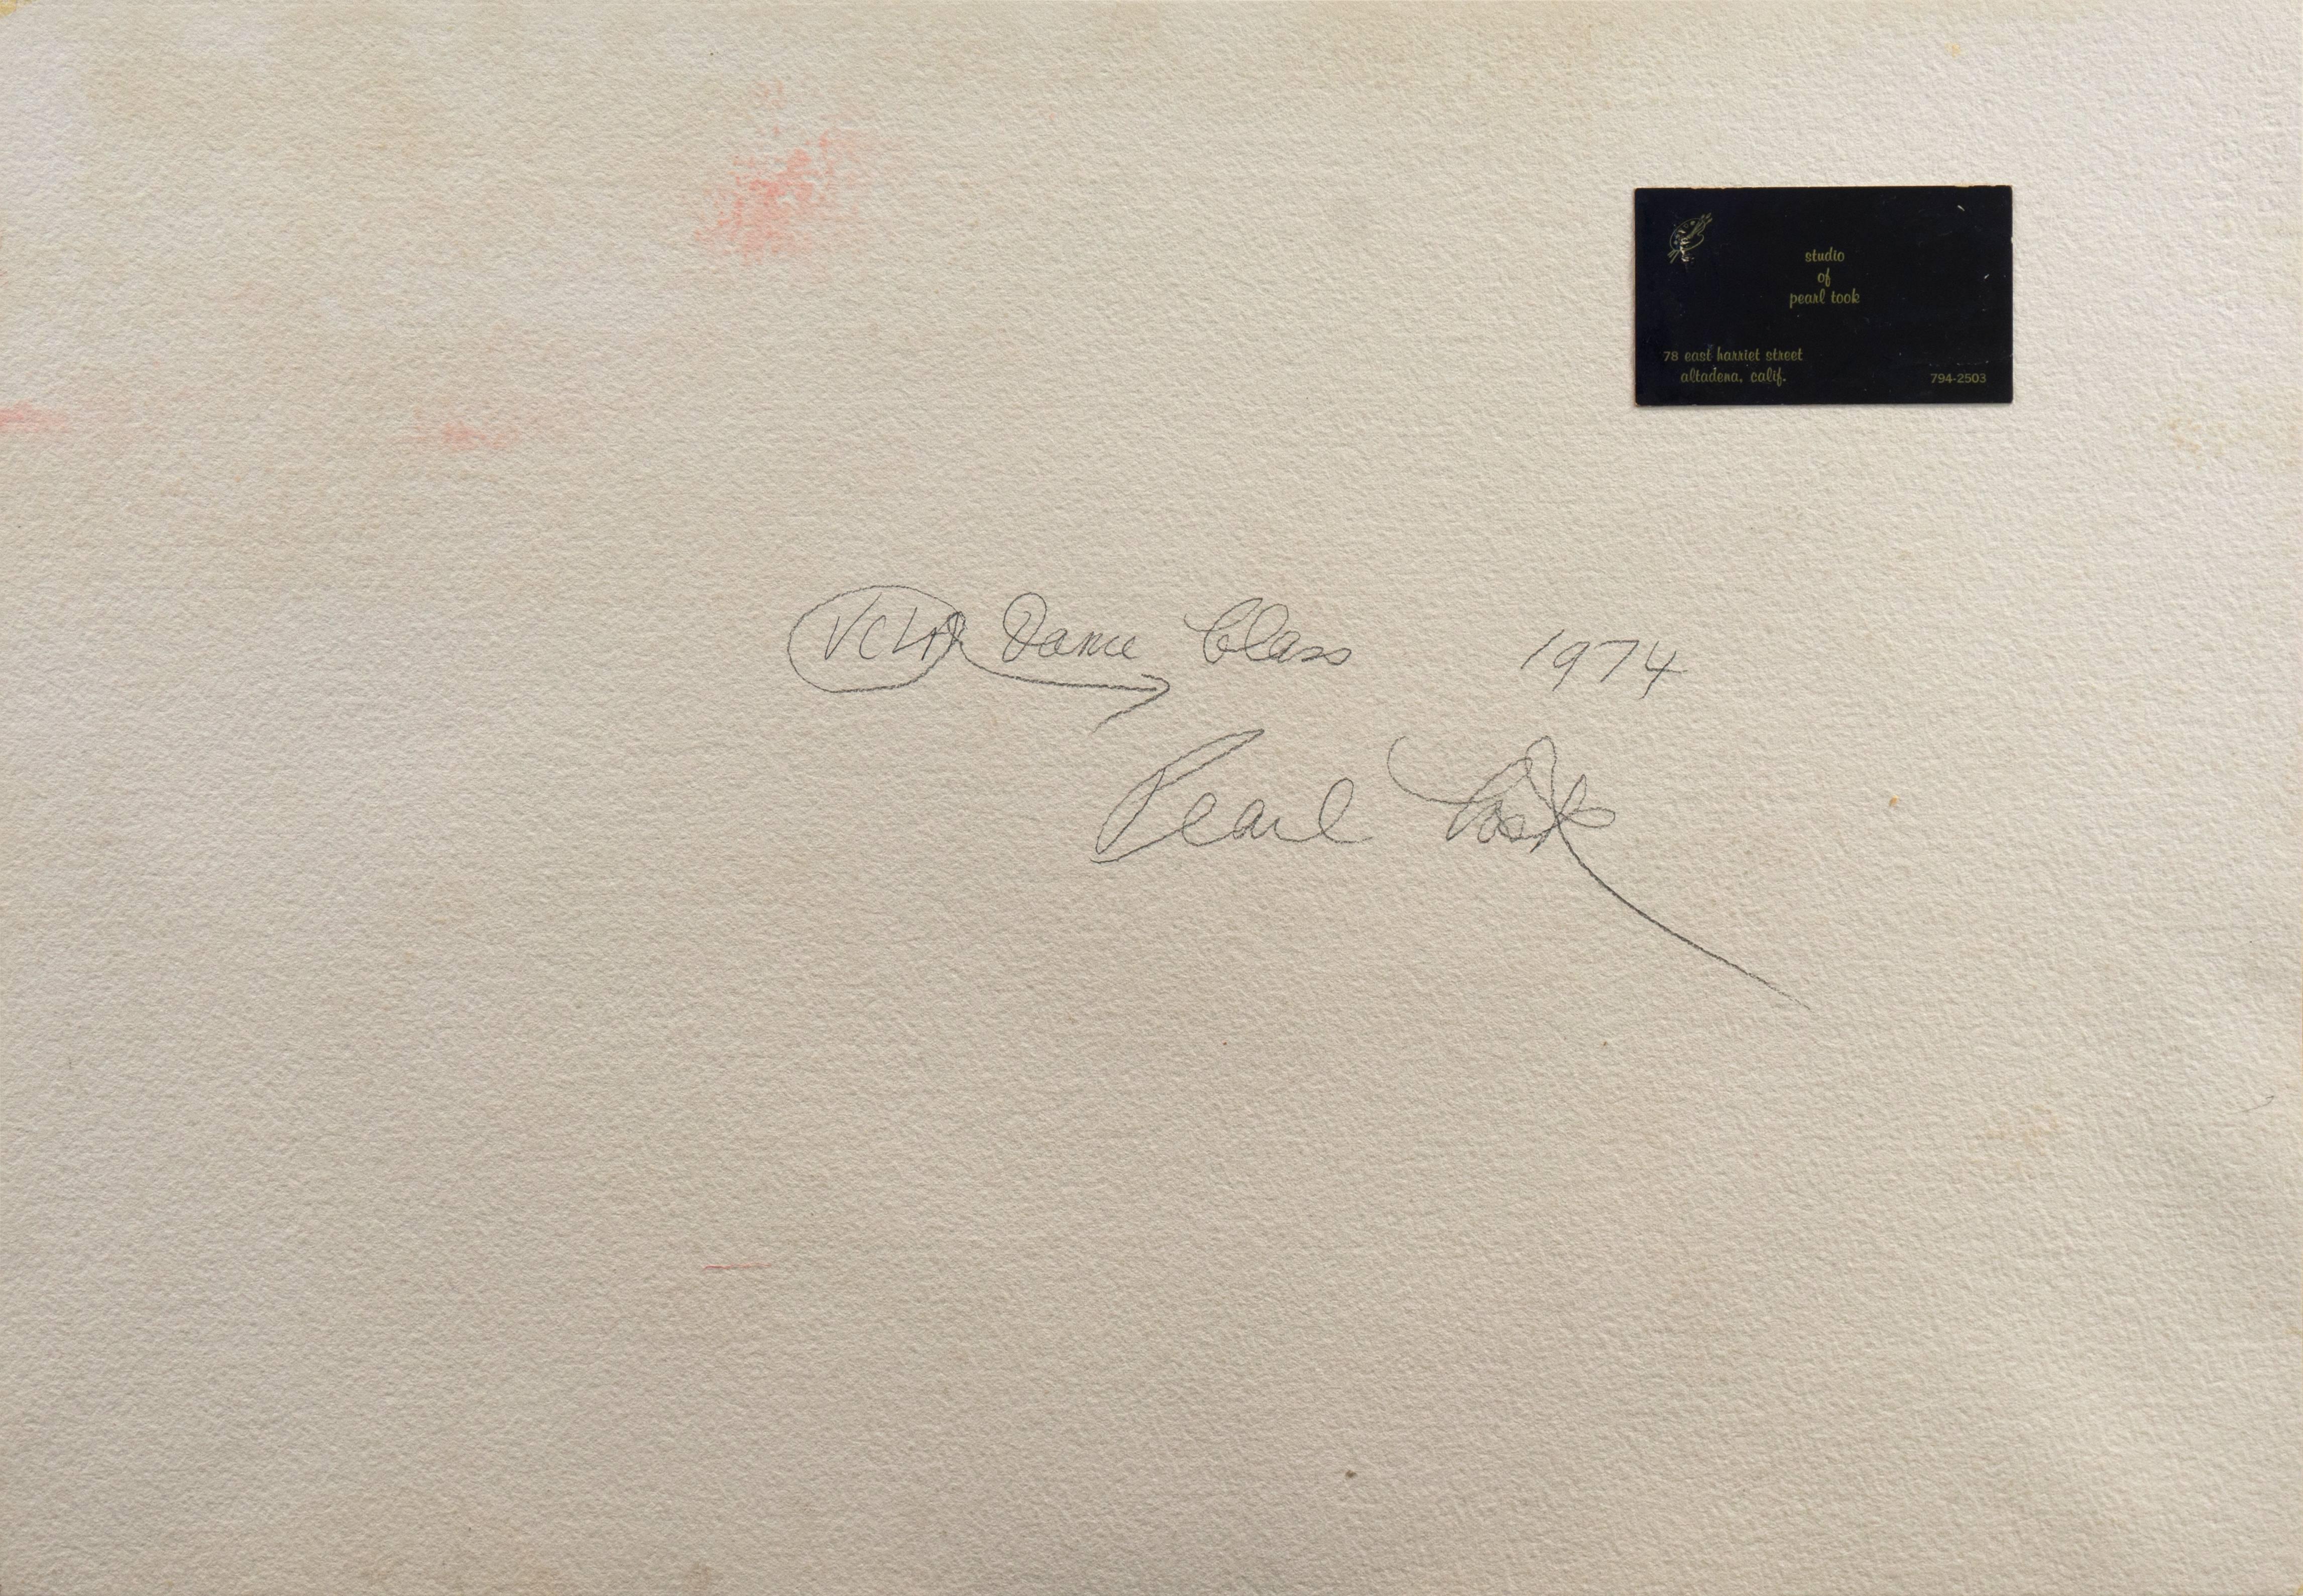 Signed middle right with monogram, 'P.T.'; additionally signed verso, dated 1974 and titled 'UCLA Dance Class'; accompanied by artist's business card.

Born in England, Pearl Took first studied at the Skipton Art School (1943-7) and, subsequently,